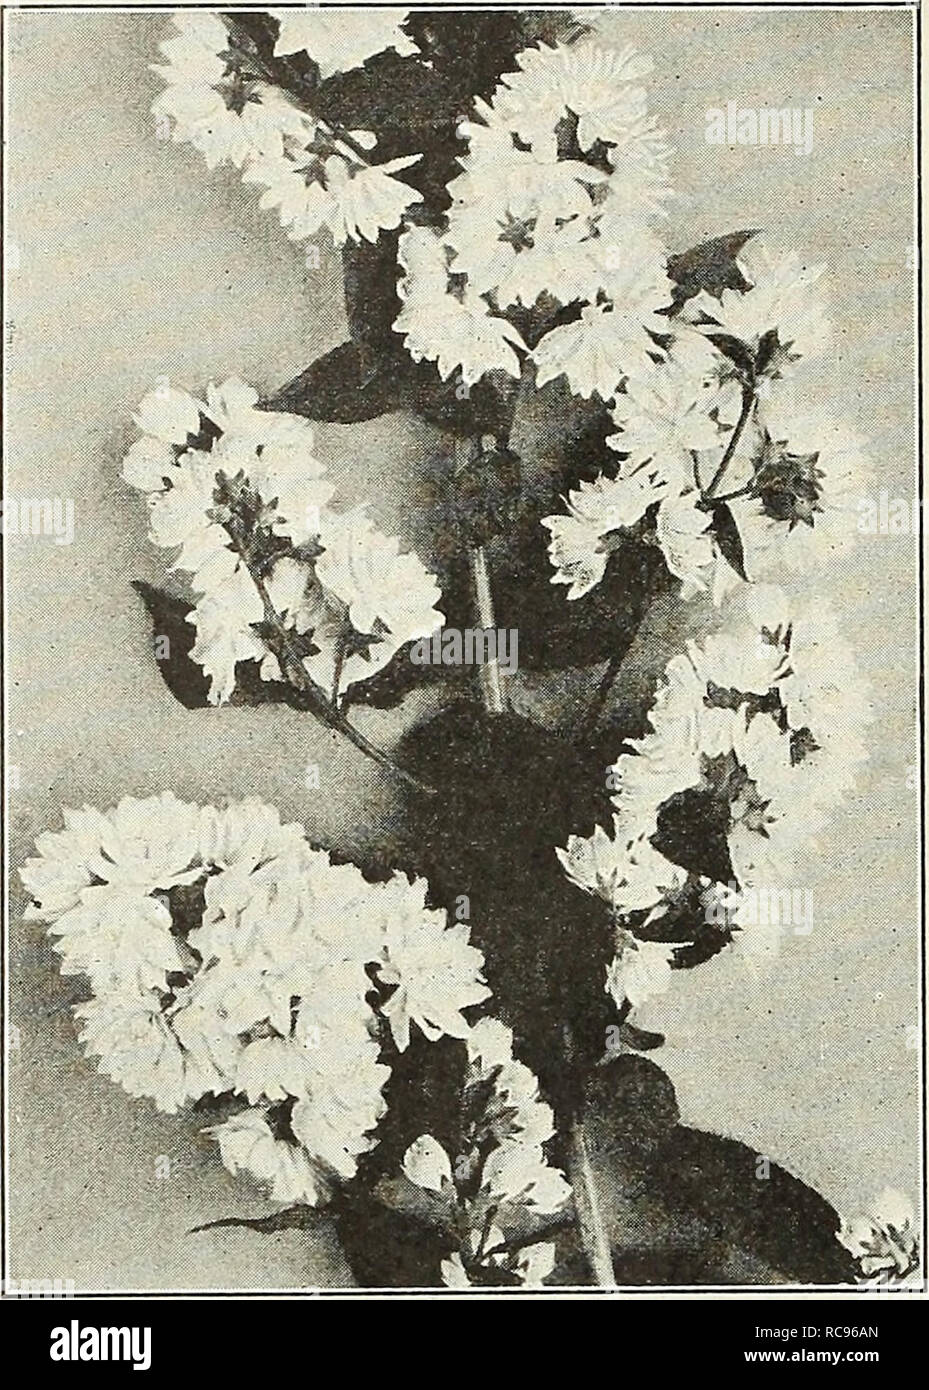 . Dreer's garden book 1926. Seeds Catalogs; Nursery stock Catalogs; Gardening Equipment and supplies Catalogs; Flowers Seeds Catalogs; Vegetables Seeds Catalogs; Fruit Seeds Catalogs. 200 /flElffiXA-BREE^ CHOICE HARDY SHRUBS &gt;Hn«iiPMik. Deutzia Crenata Magnifica Deutzias. Well-known profuse flowering Shrubs, blooming in spring or early summer. Thie dwarf varieties are desirable for forcing under glass. — Candidissima plena. A fine tall, double white, 60 cts. each. — Crenata Magnifica. A most distinct variety with exceptionally large corymbs of pure white double flowers, produced in wonderf Stock Photo